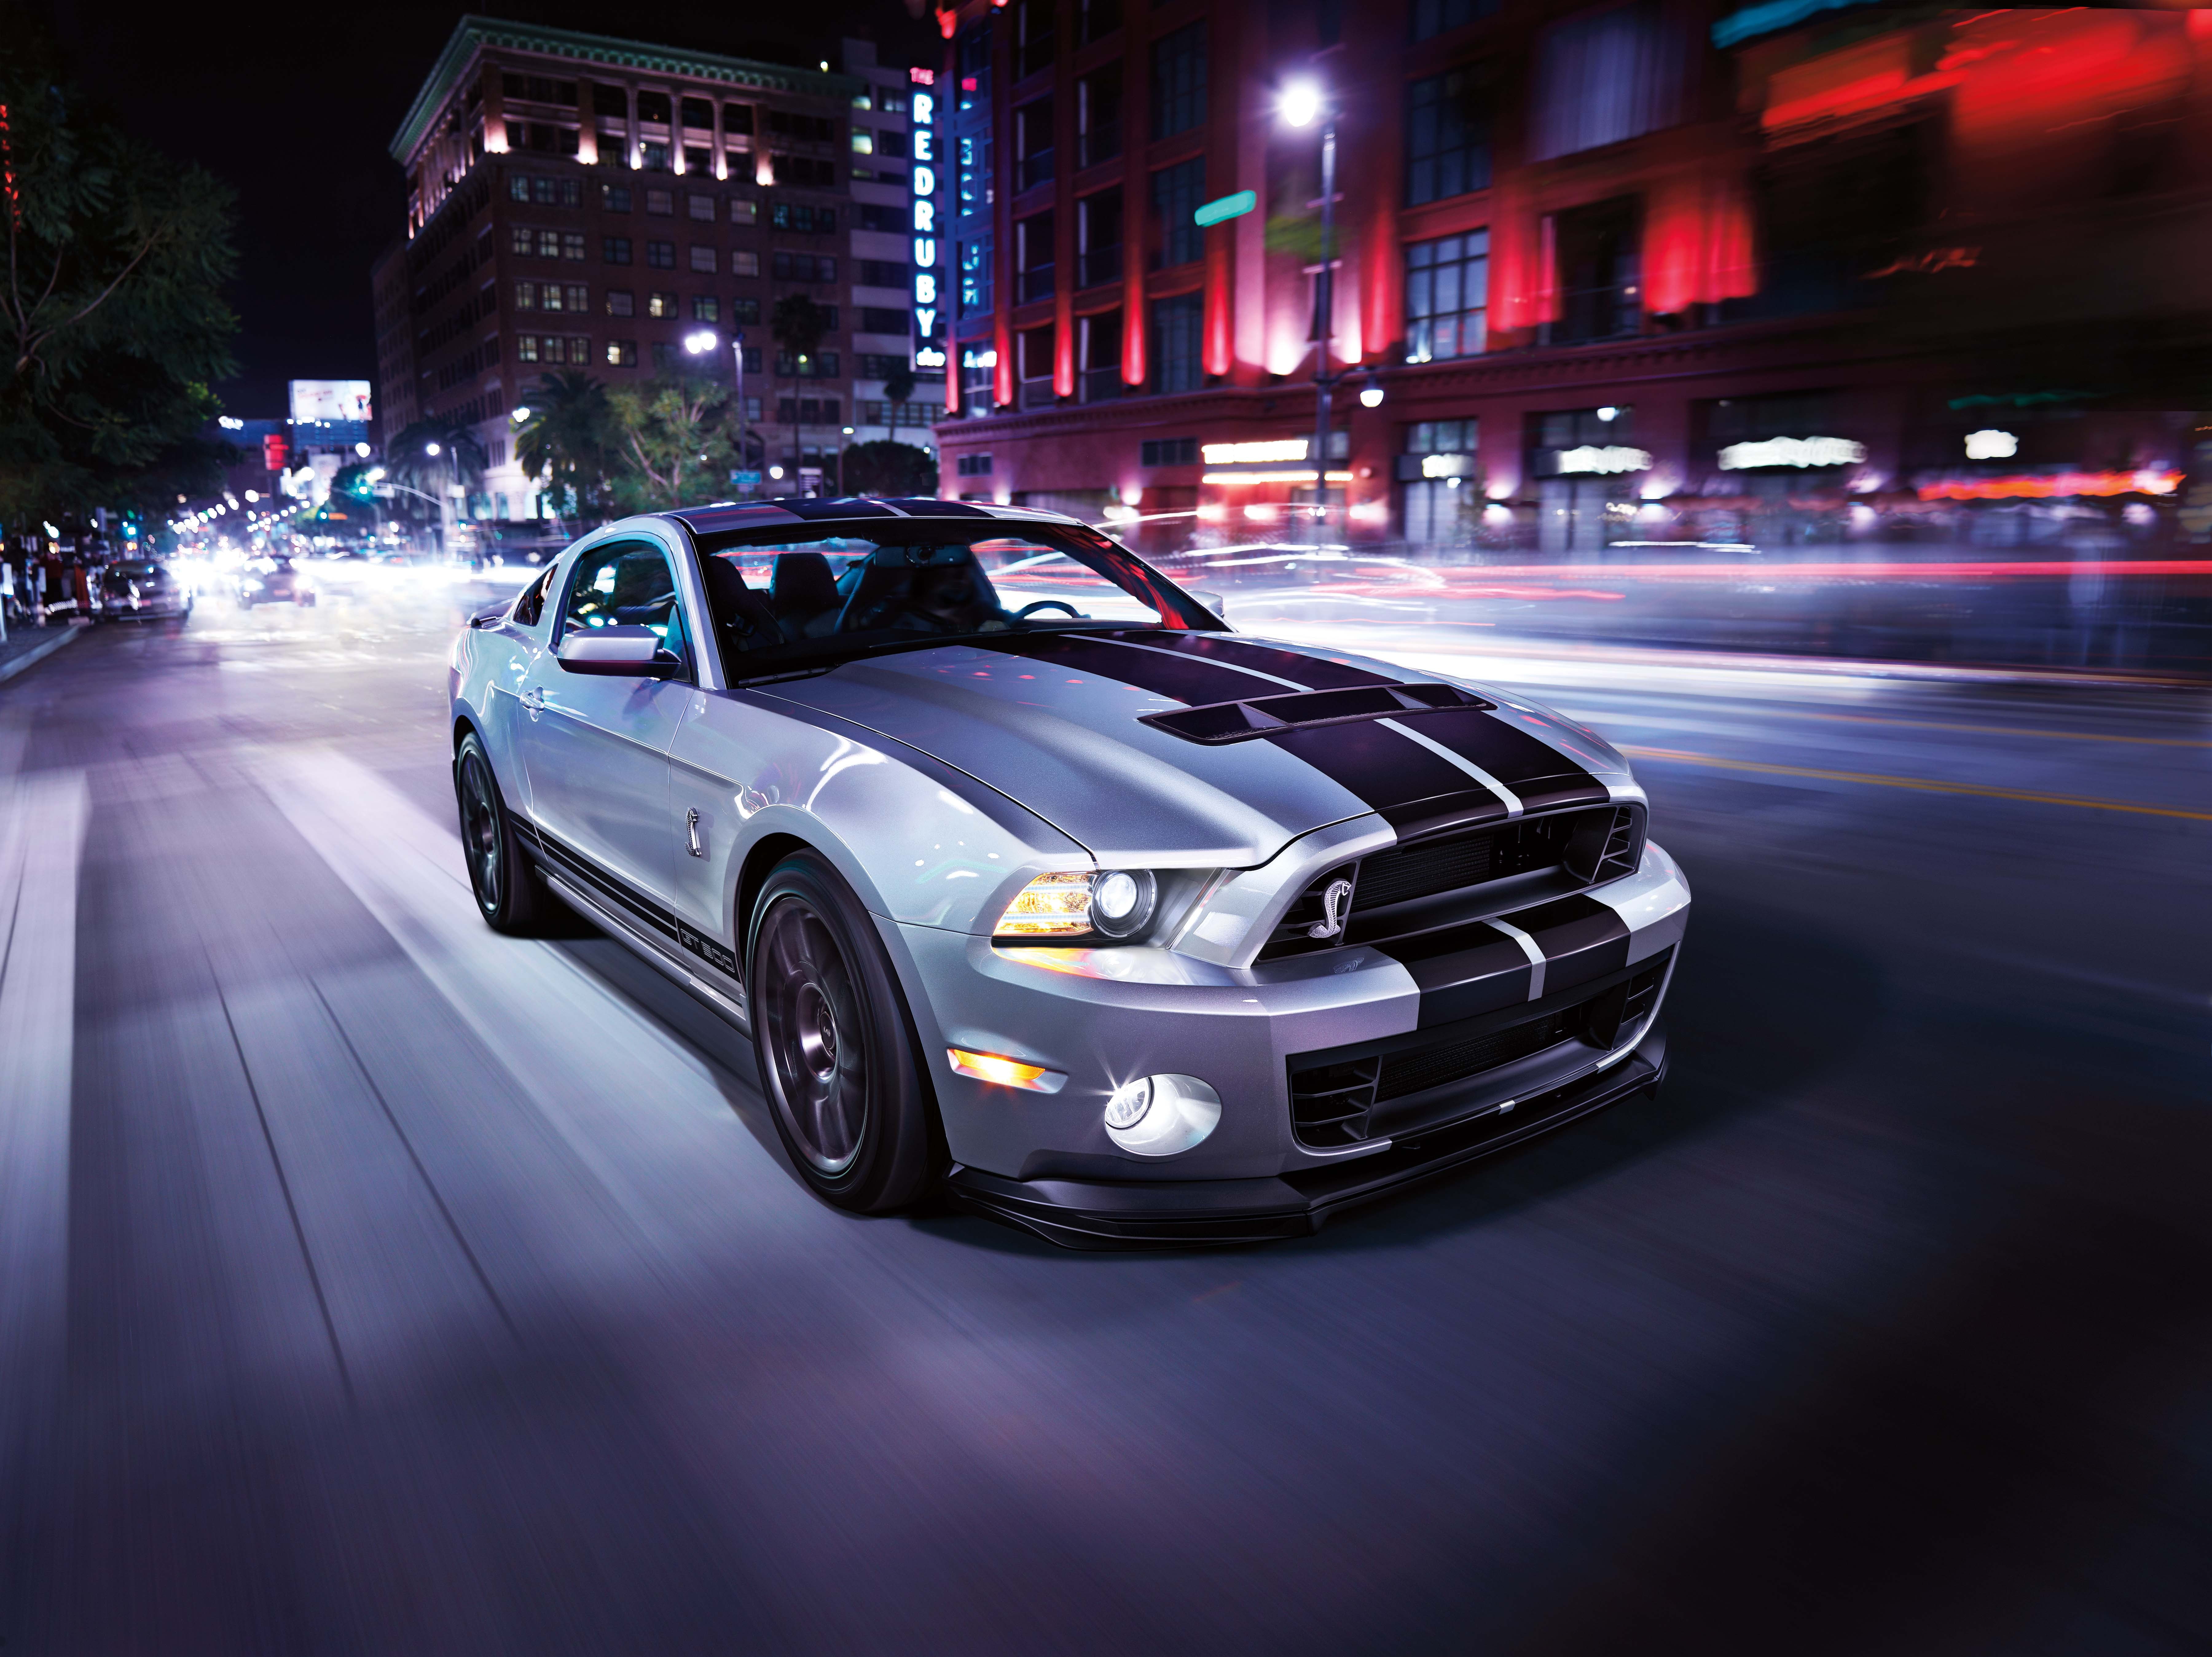 road, car, light, the city, strip, speed, mustang, sports car